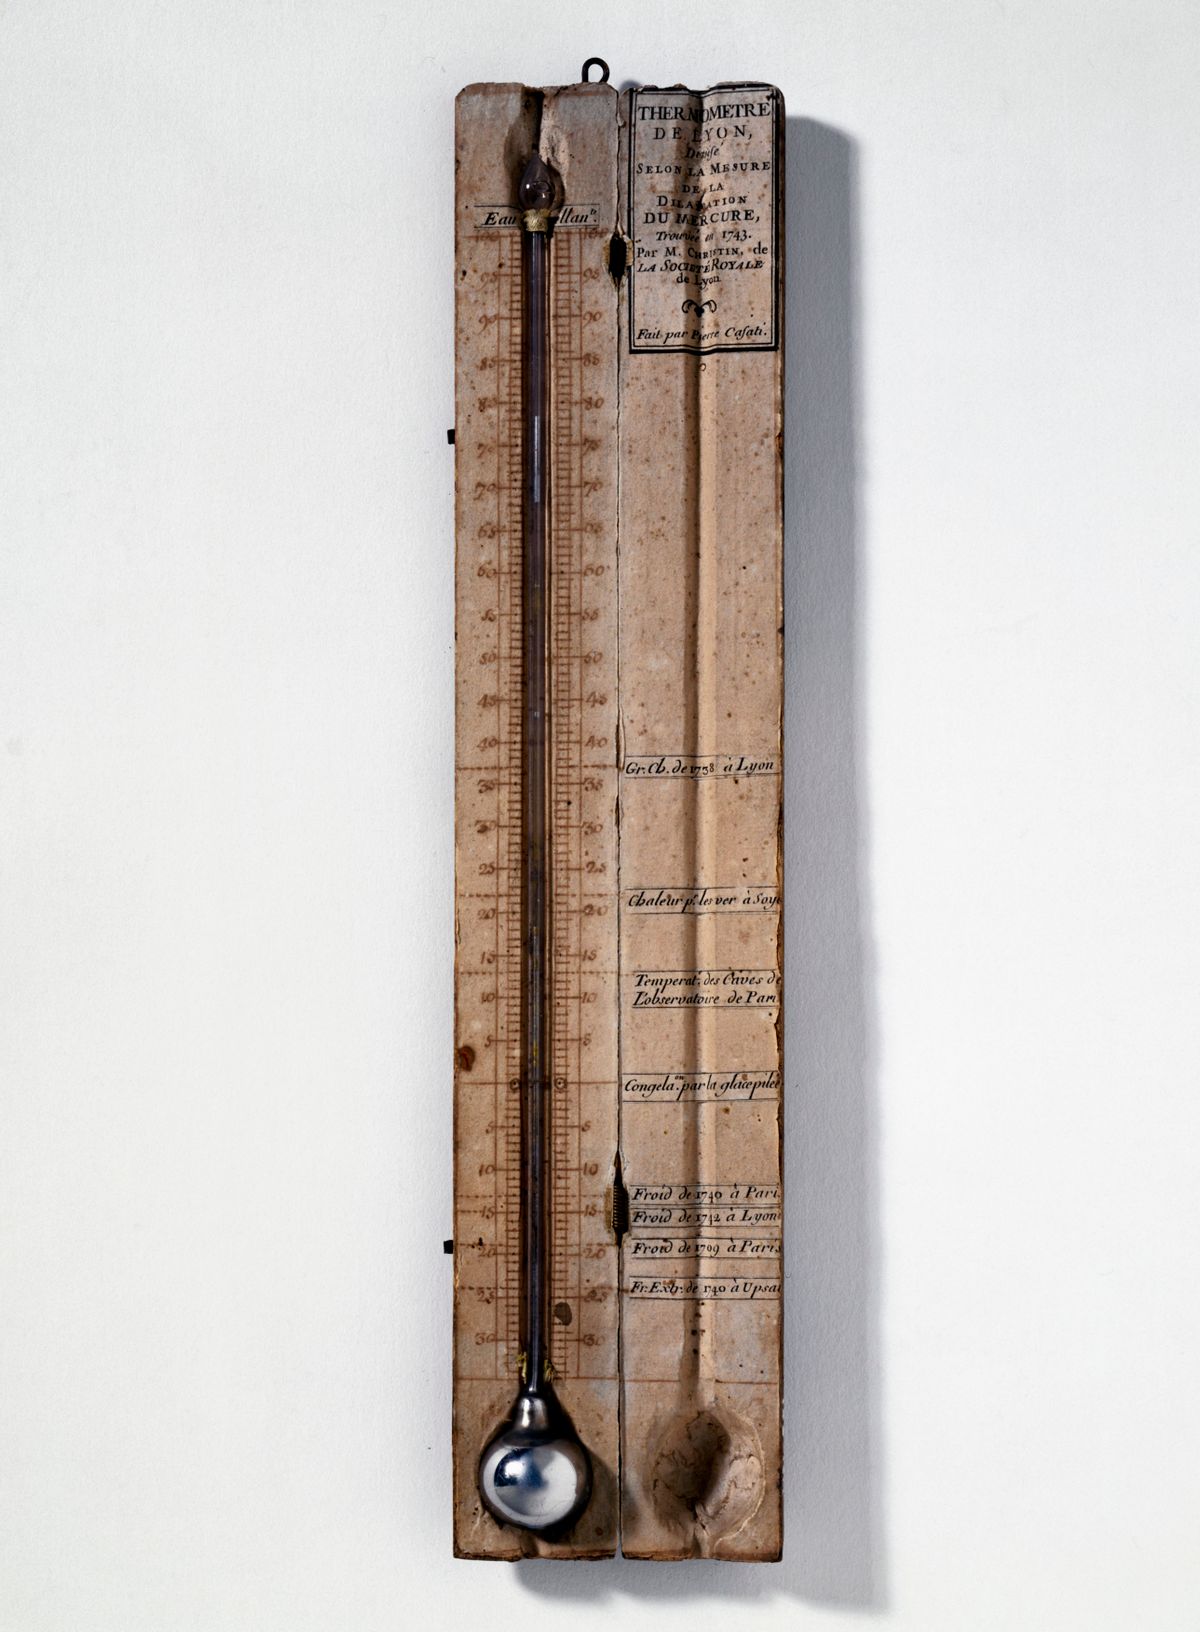 Mercury-in-glass thermometer, French, c 1790.